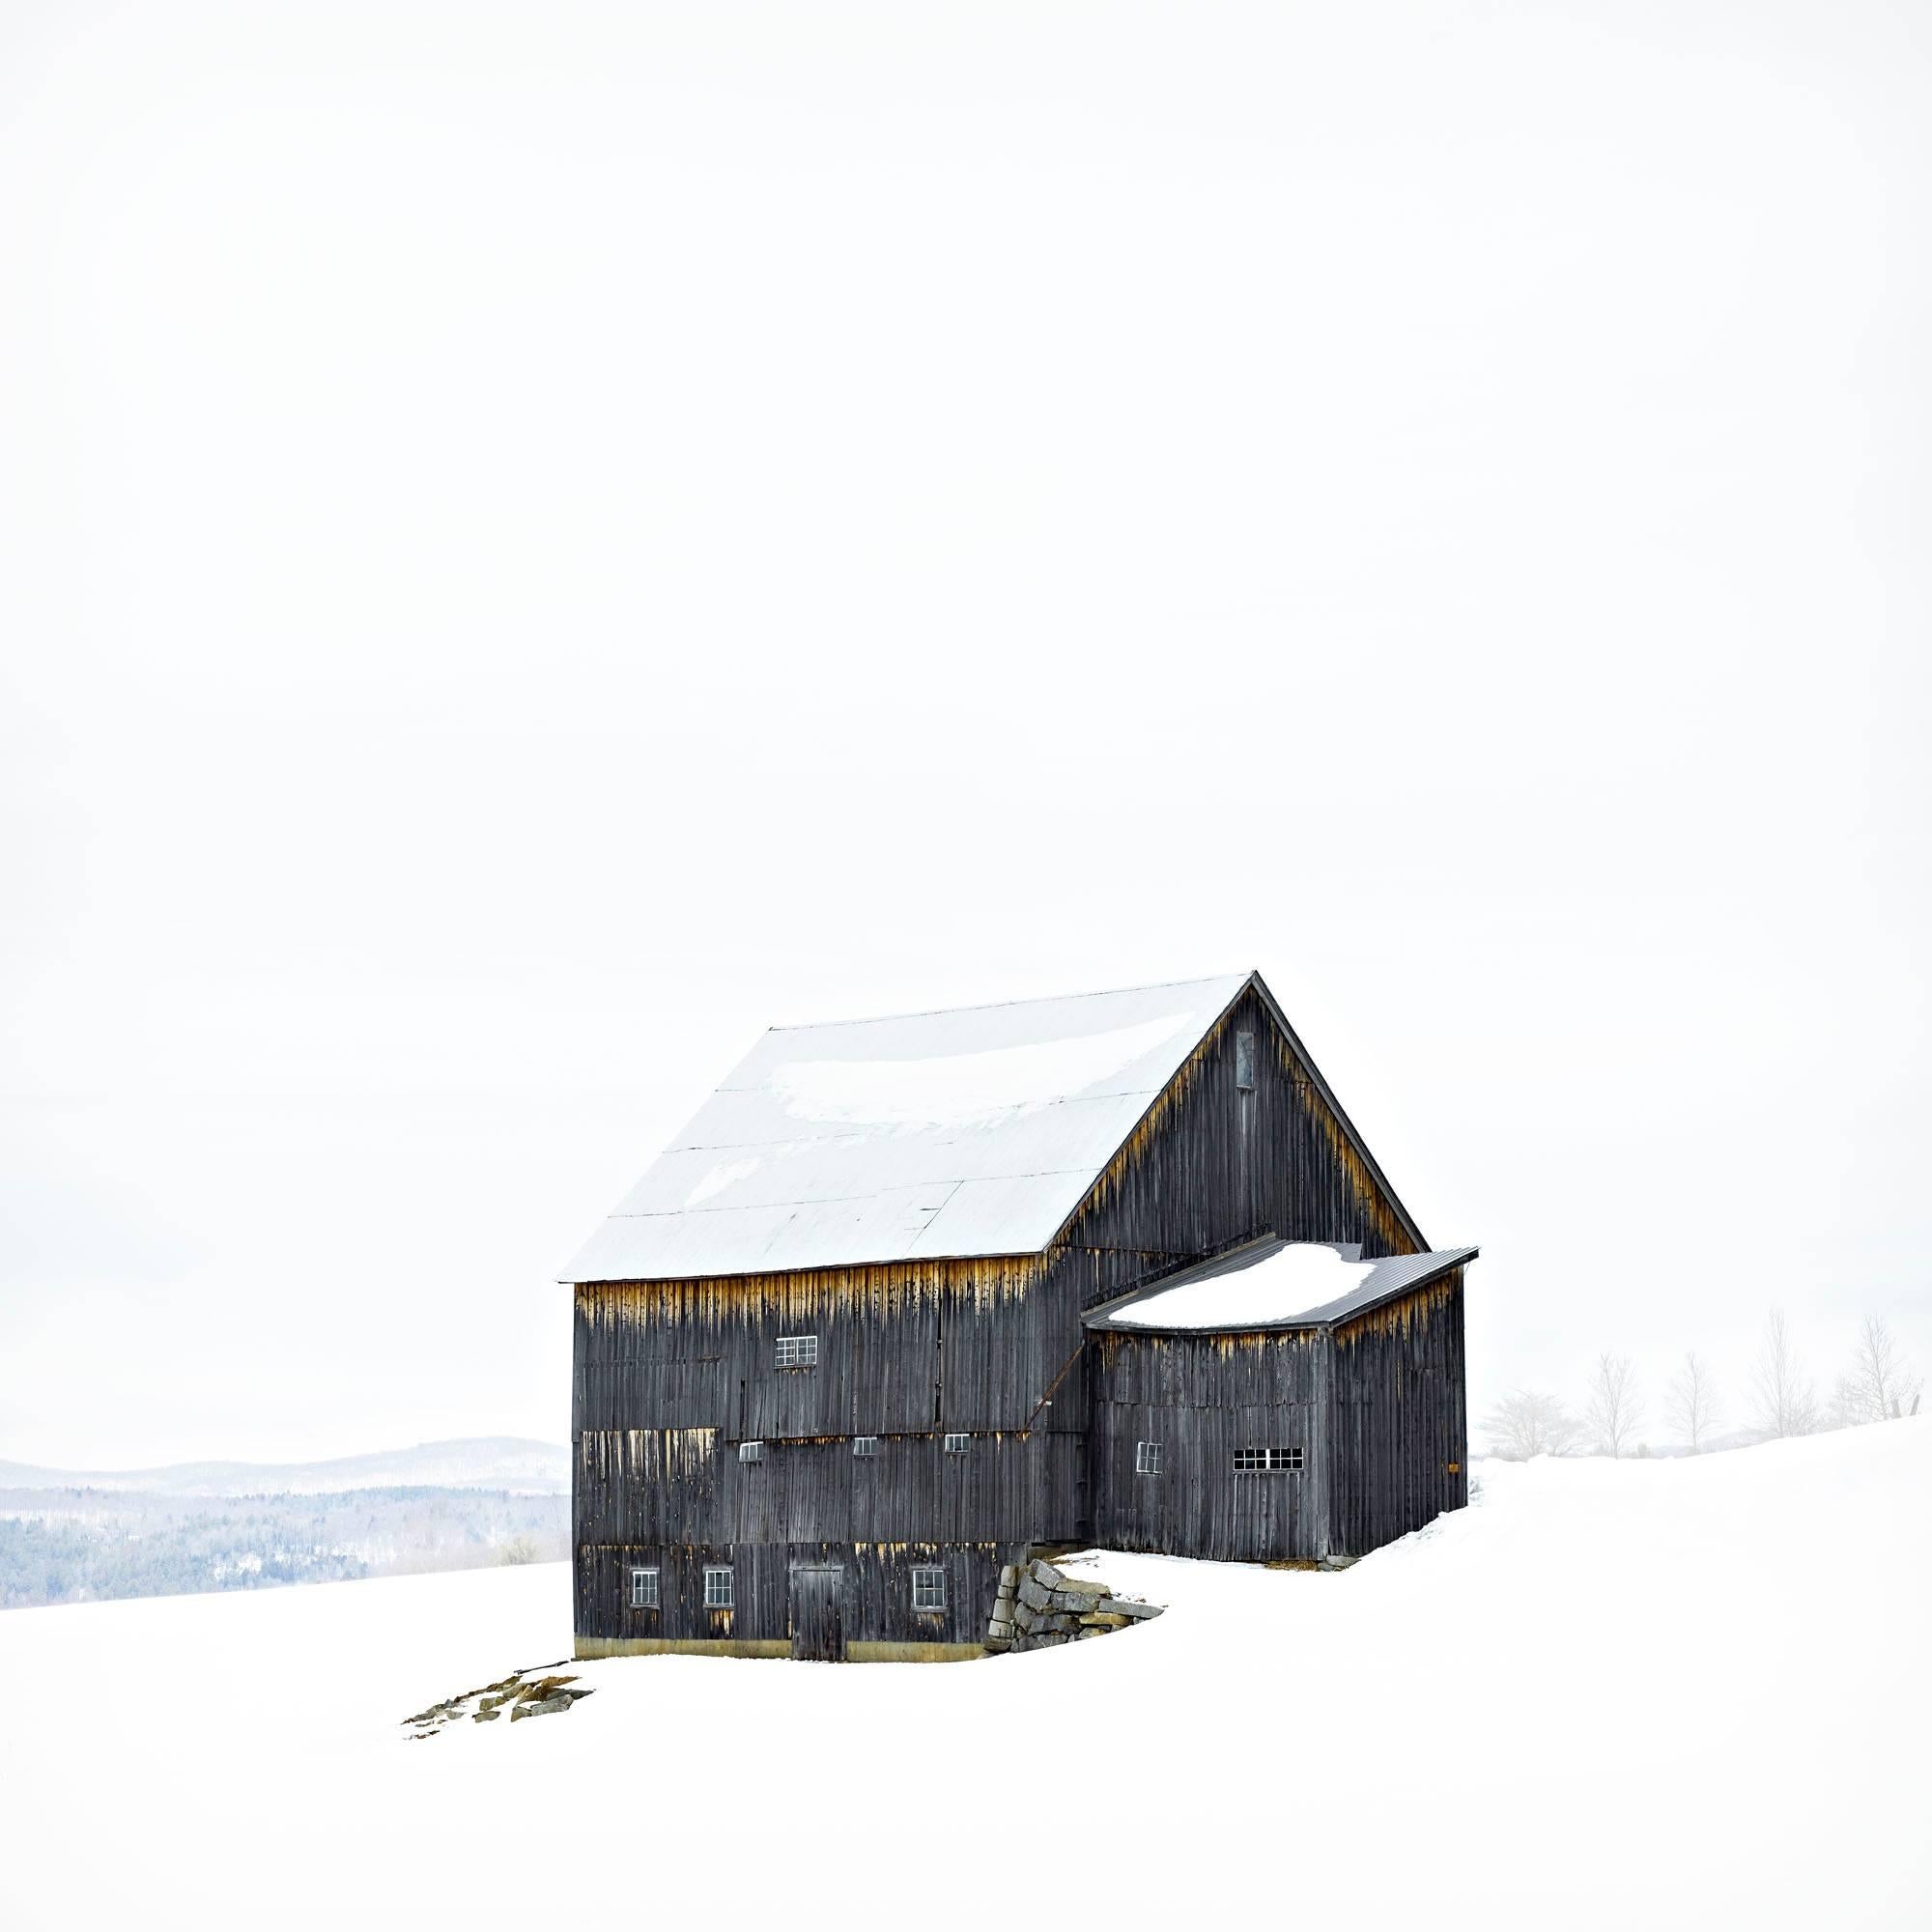 Jim Westphalen Landscape Photograph - Max Gray Barn, Photographic Archival Pigment Print, Limited Edition, Framed